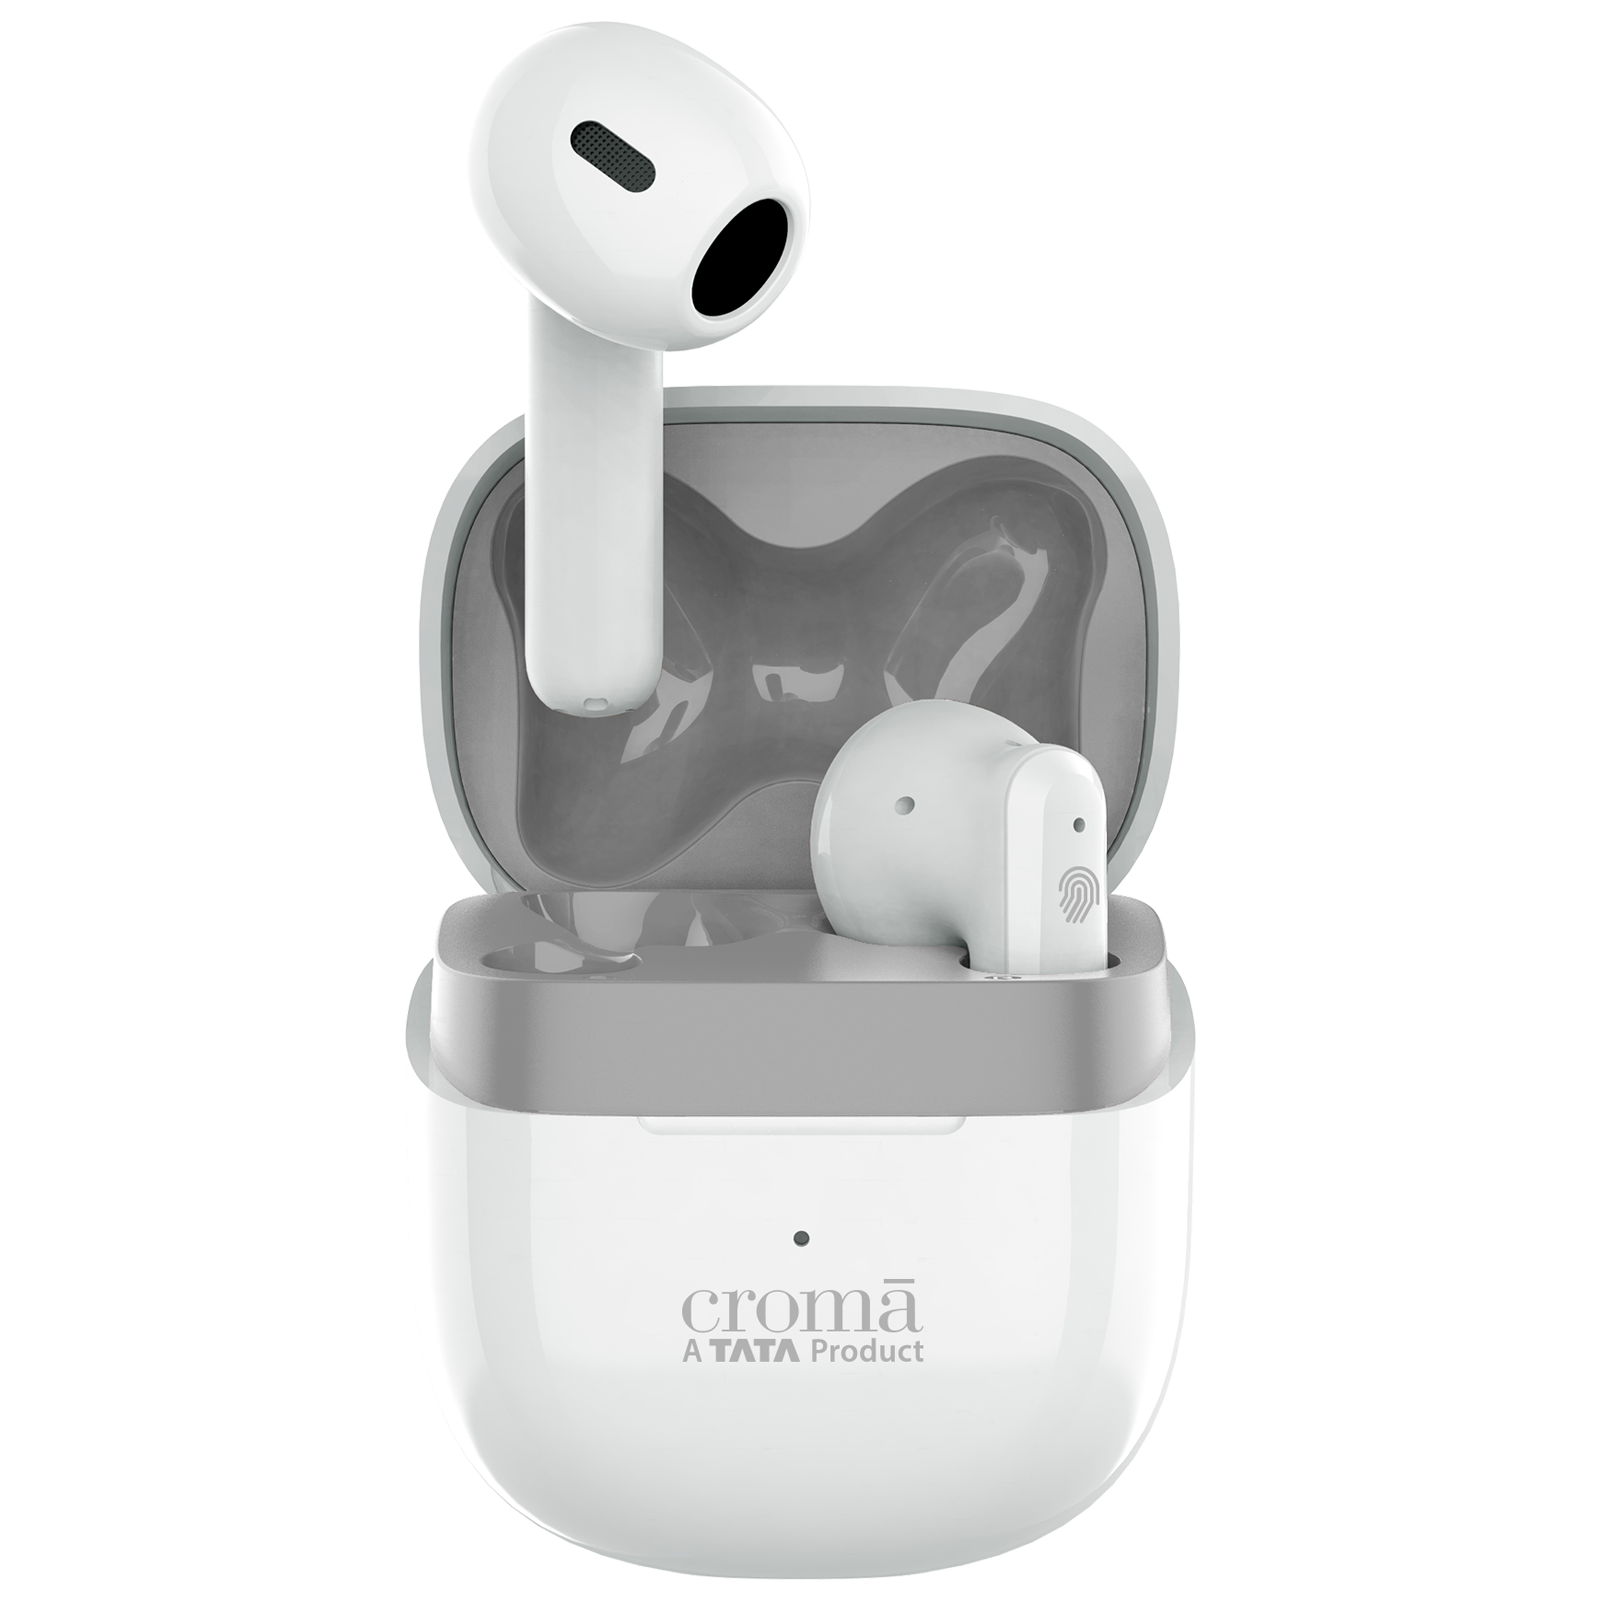 Croma CRSE024EPA301501 TWS Earbuds with Environmental Noise Cancellation (IPX4 Waterproof, Fast Charging, White and Grey)